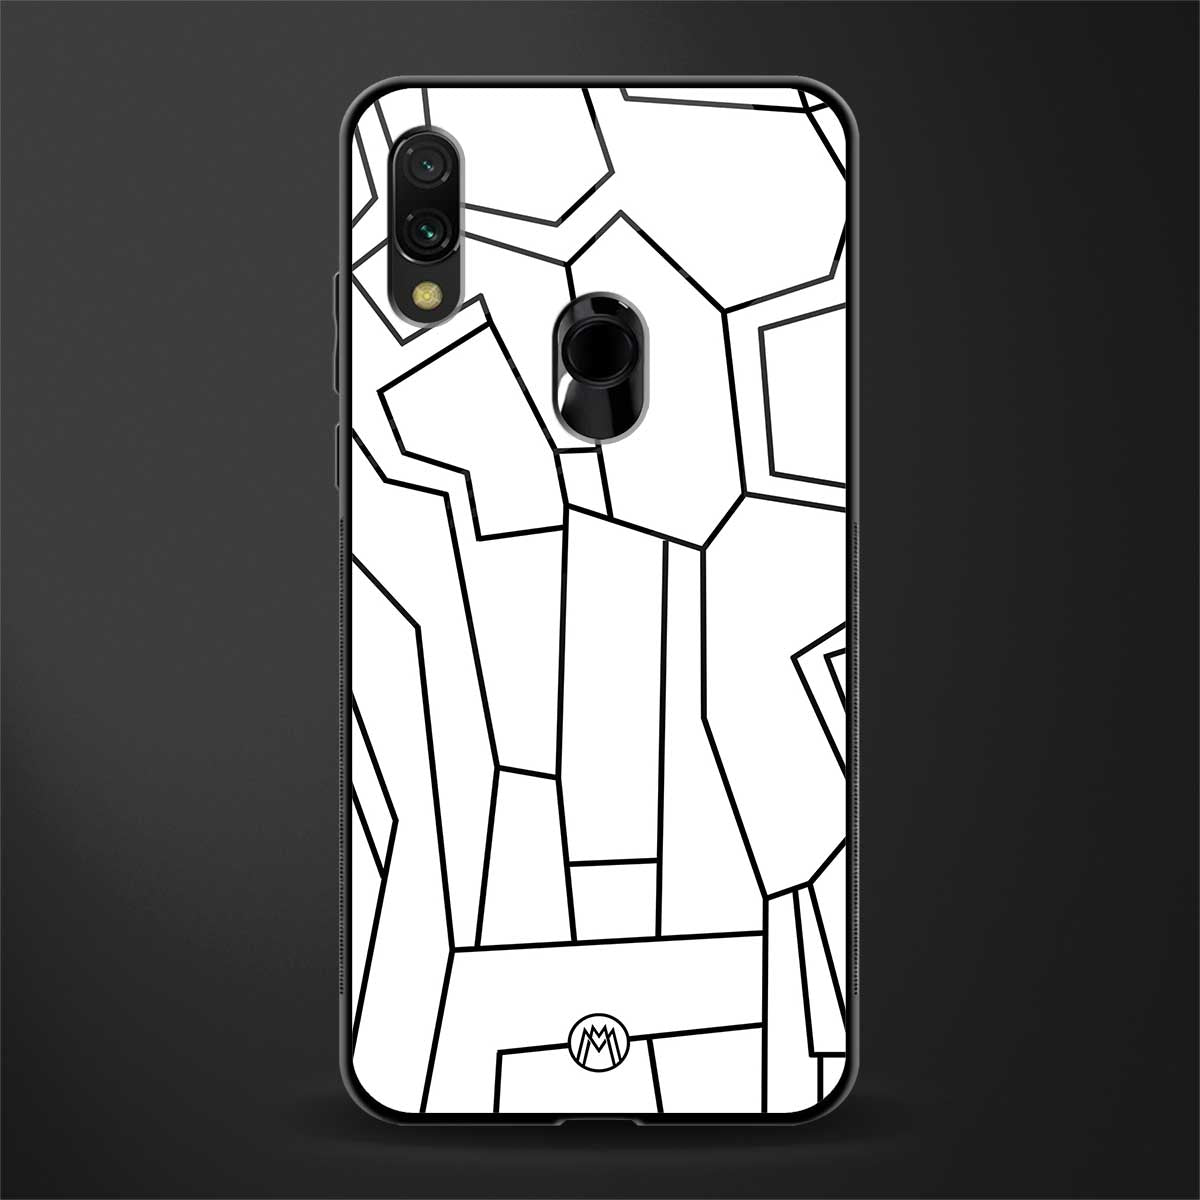 Mosaic Glass Case for redmi note 7 pro image